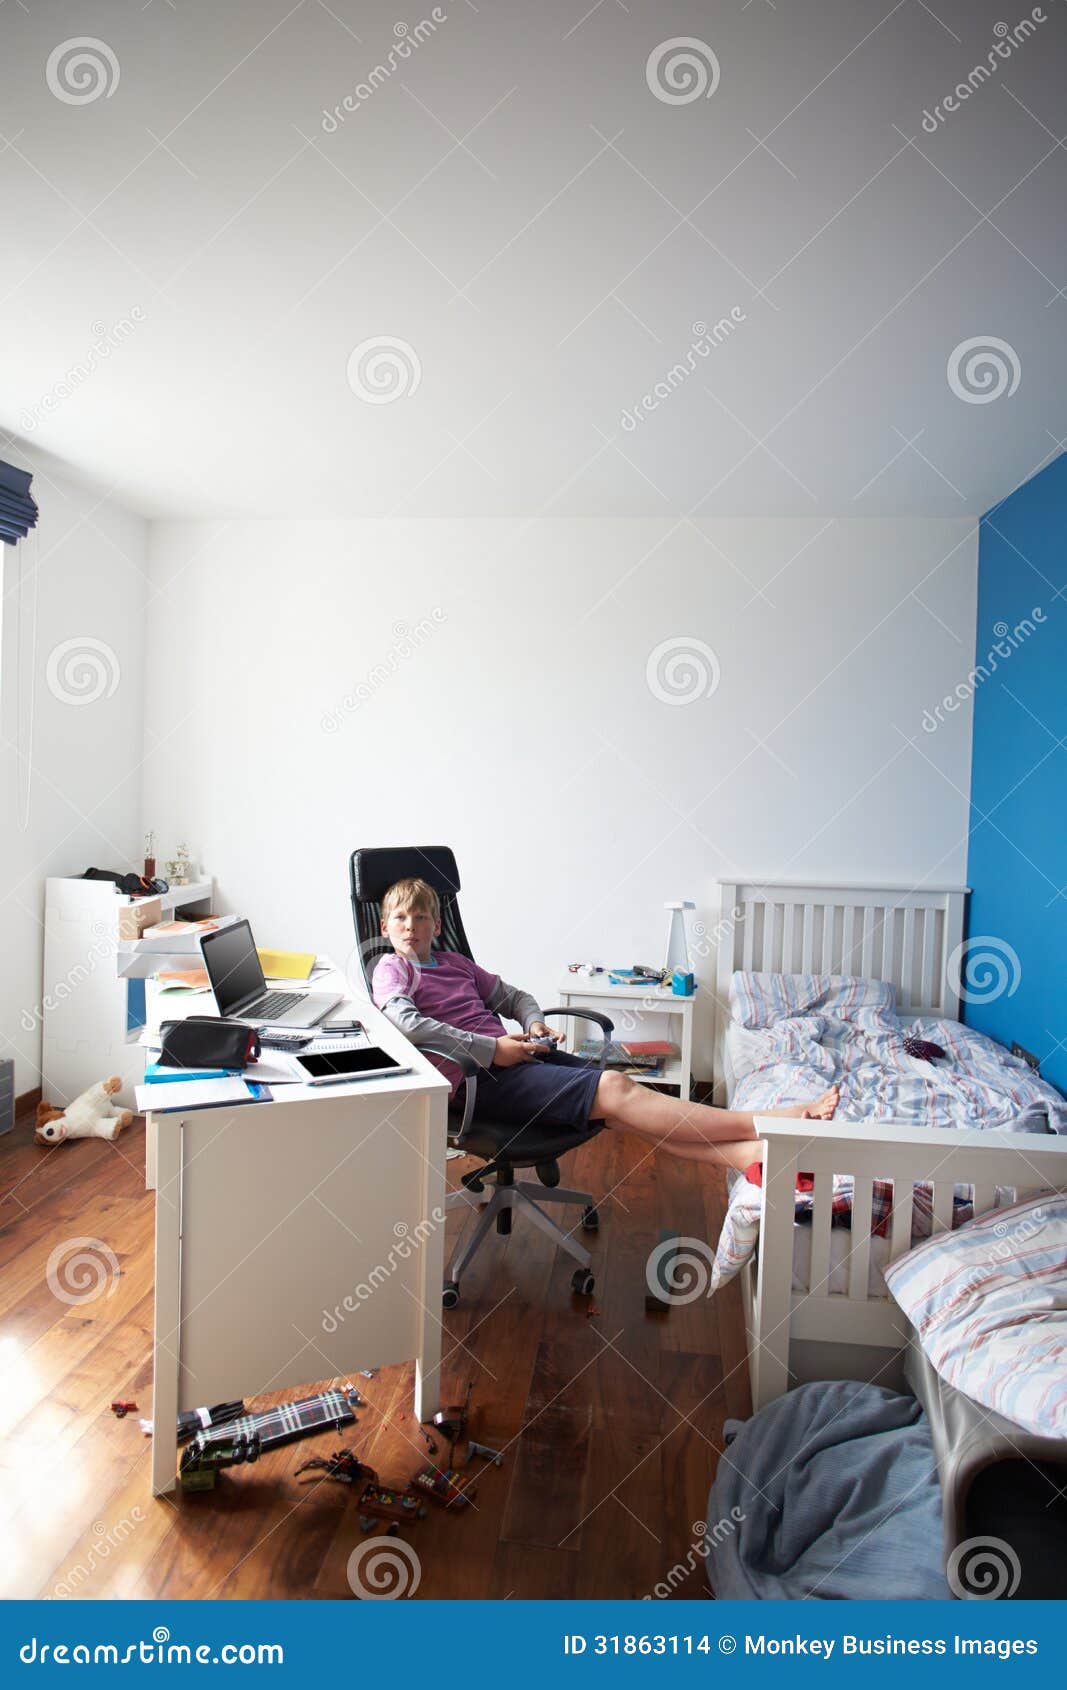 Boy Playing Video Game In Bedroom Stock Images - Image: 31863114